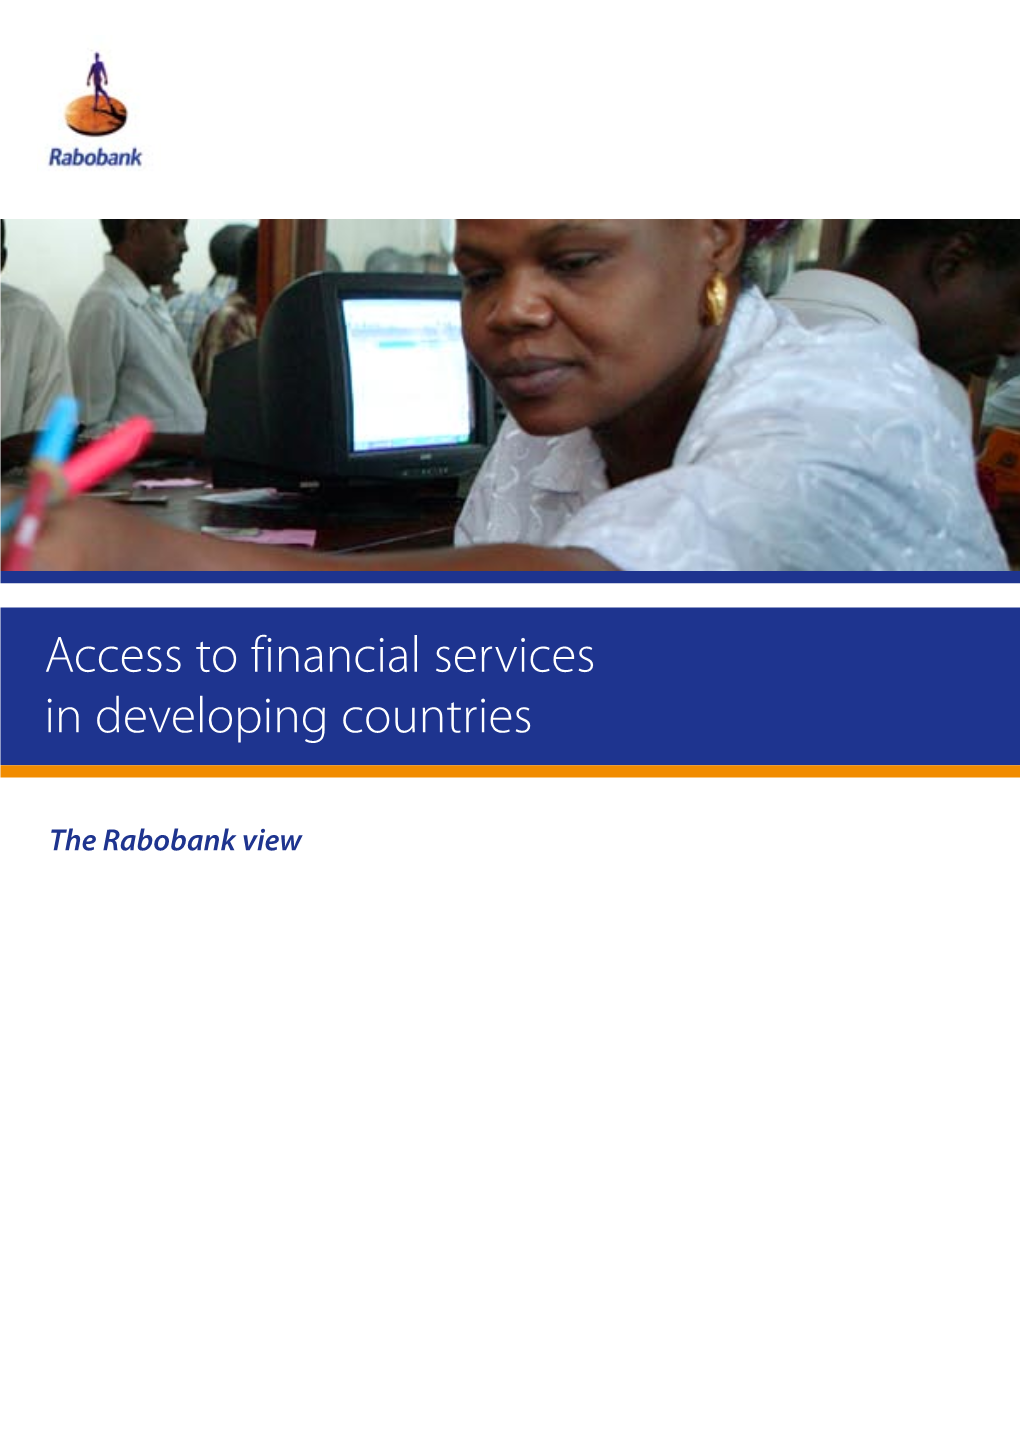 Access to Financial Services in Developing Countries